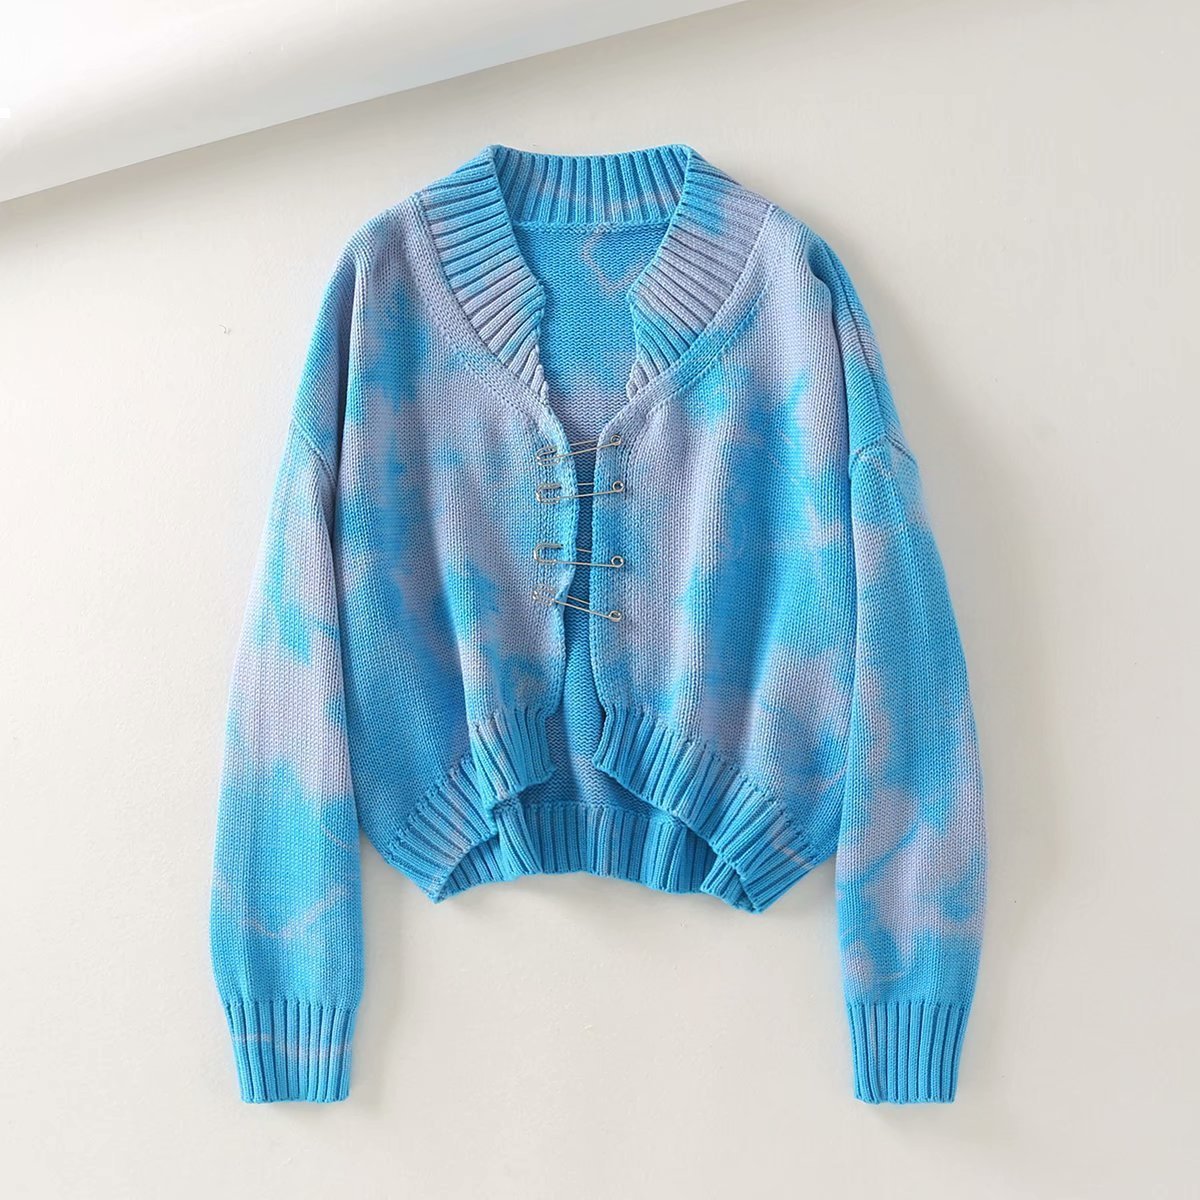 

New Sexy 2021 Cardigan Knit Shirt Harvest Women in Early Autumn Woman Streetwear Clothes G8gh D570, The sky is blue.